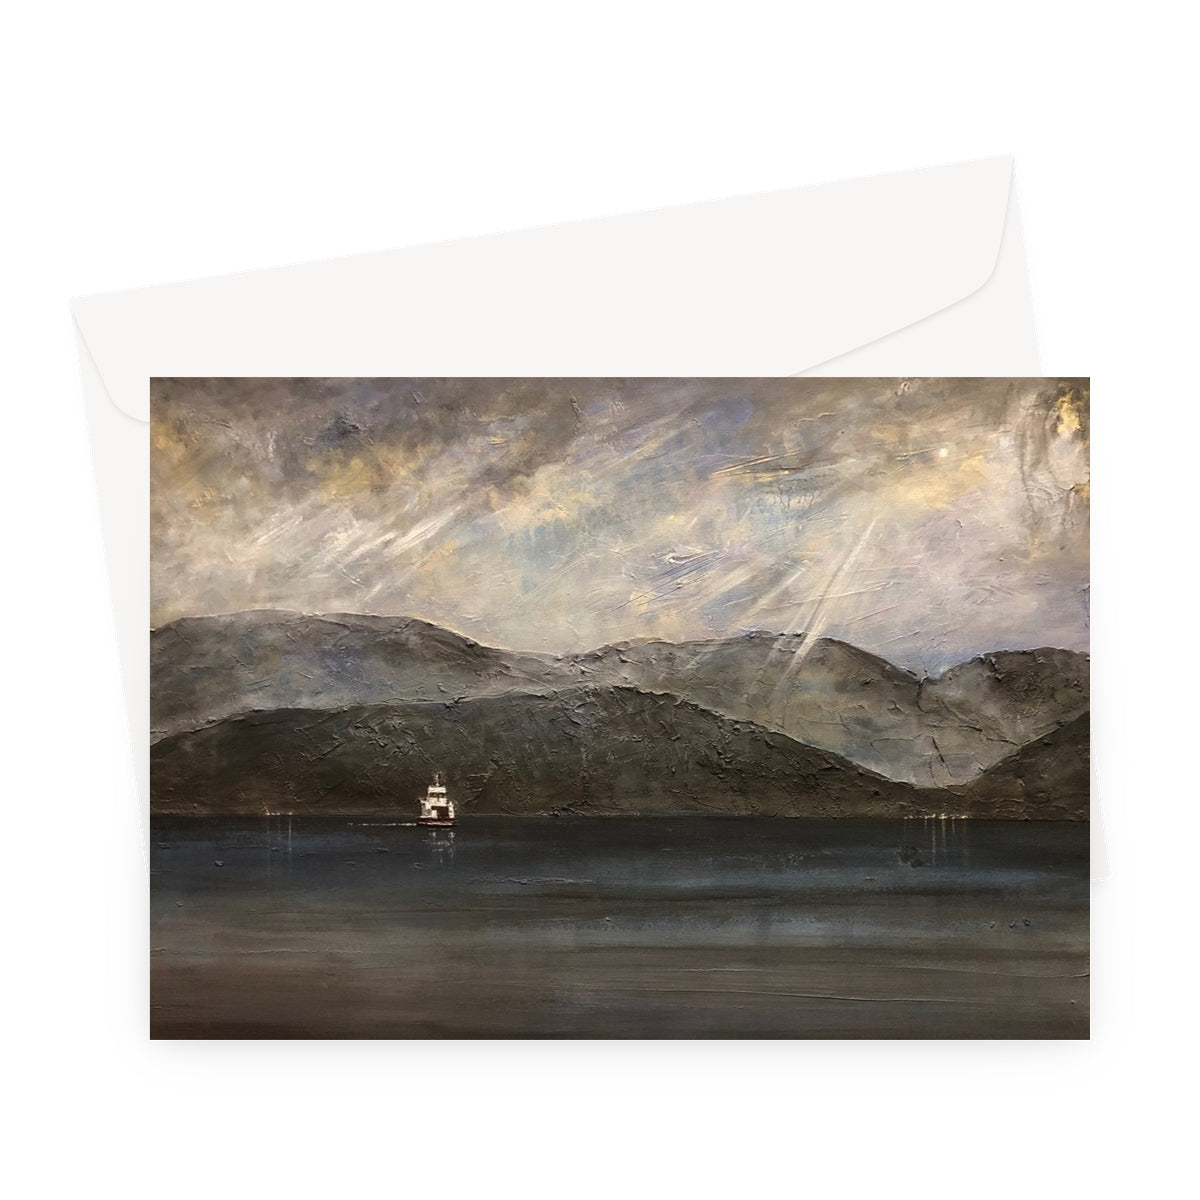 Lochranza Moonlit Ferry Arran Art Gifts Greeting Card-Greetings Cards-Arran Art Gallery-A5 Landscape-1 Card-Paintings, Prints, Homeware, Art Gifts From Scotland By Scottish Artist Kevin Hunter